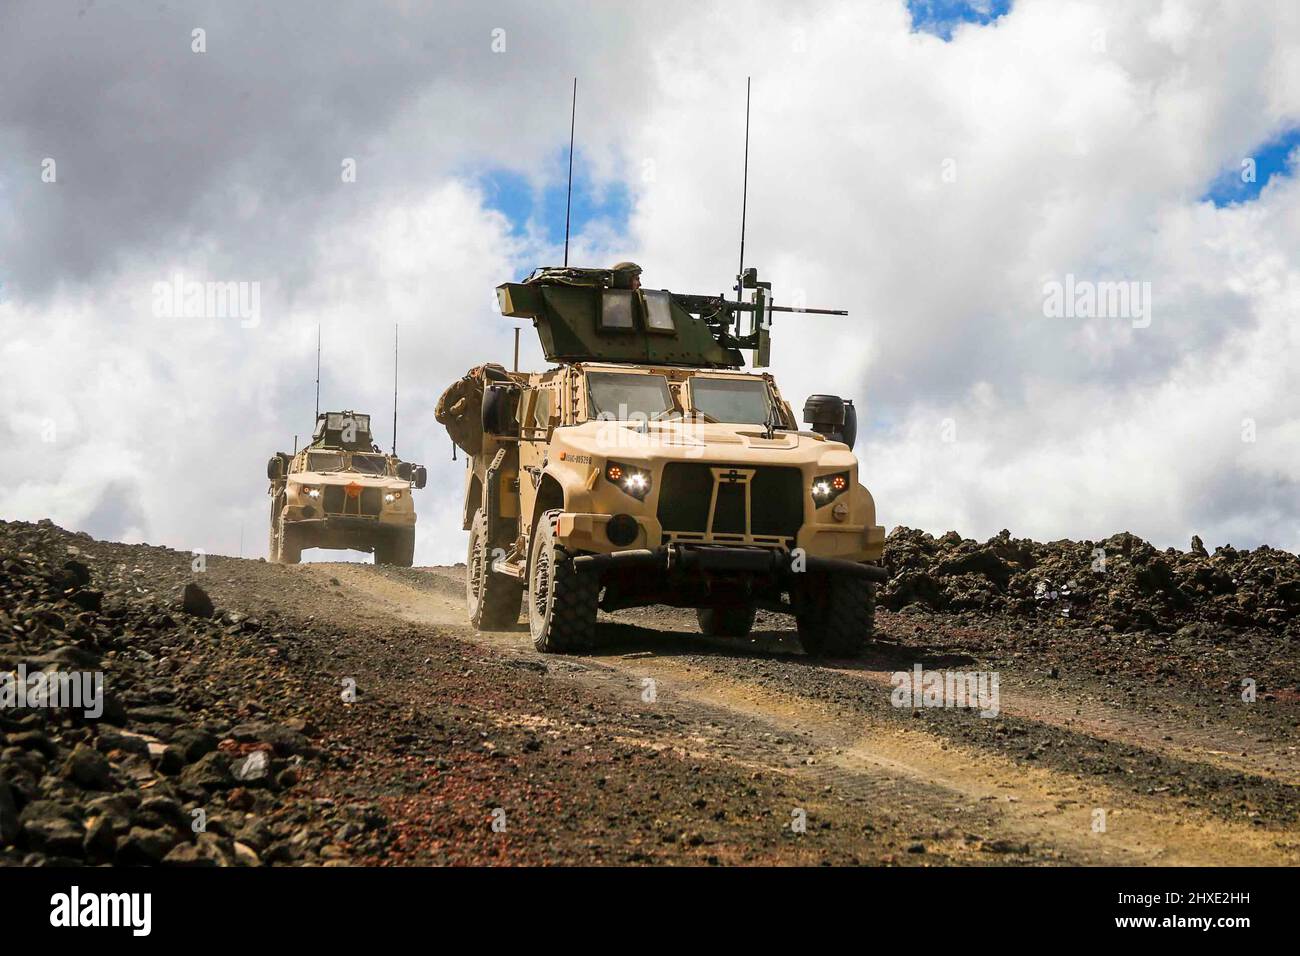 Hilo, Hawaii, USA. 3rd Mar, 2022. U.S. Marines with 1st Battalion, 12th Marines, 3d Marine Division fire a joint light tactical vehicle mounted M240B machine gun while conducting a convoy movement during Spartan Fury 22.1 at Pohakuloa Training Area, Hawaii, March 3, 2022. Spartan Fury is a Battalion level training exercise designed to refine long-range communications through naval asset integration, mission processing from battalion to firing sections, and 21st Century Foraging. Credit: U.S. Marines/ZUMA Press Wire Service/ZUMAPRESS.com/Alamy Live News Stock Photo